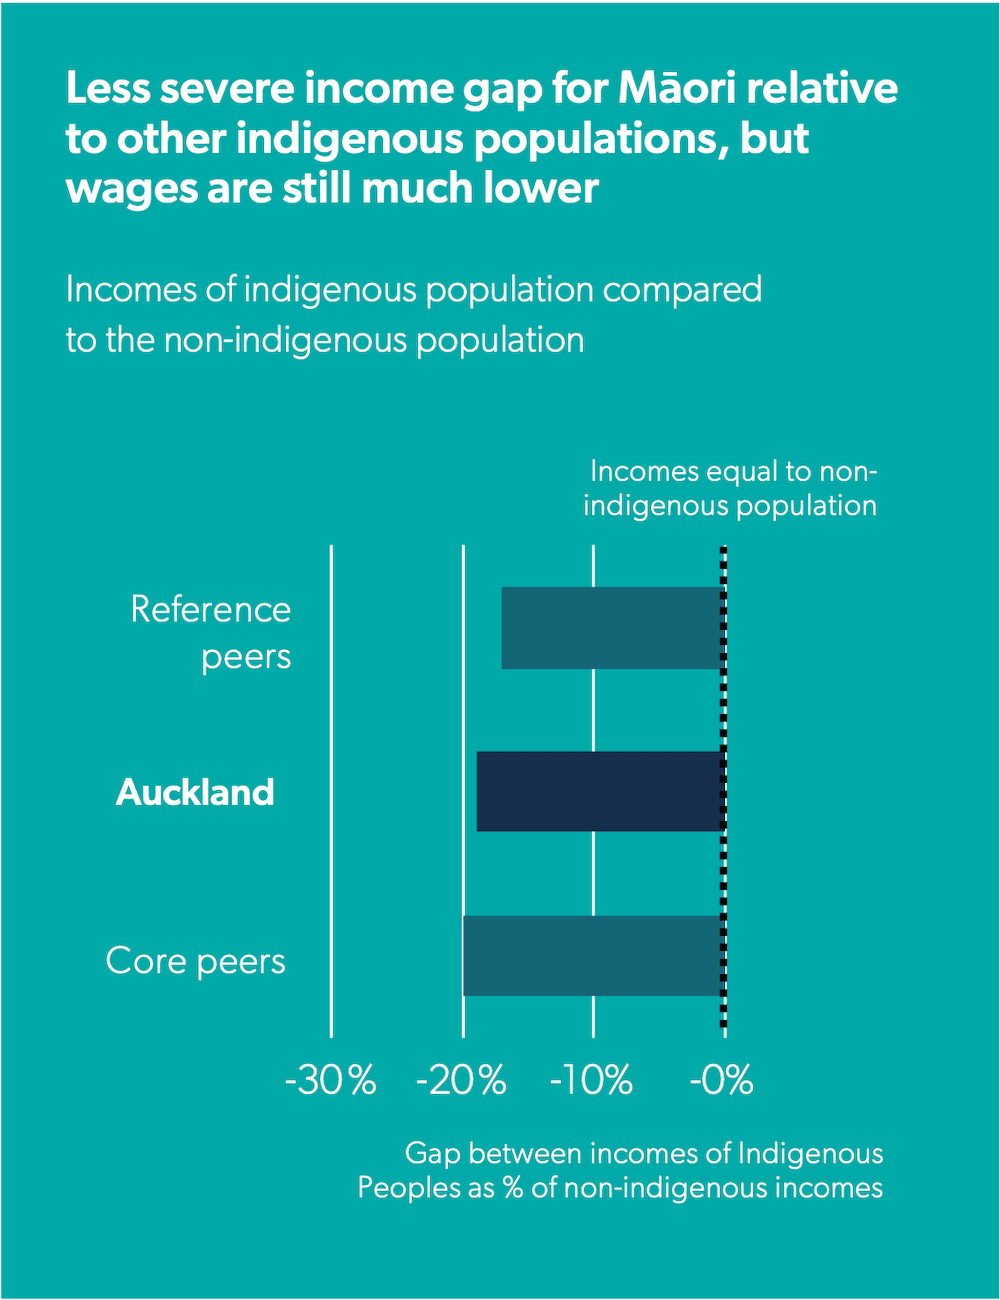 Less severe income gap for Māori relative to other indigenous populations, but wages are still much lower